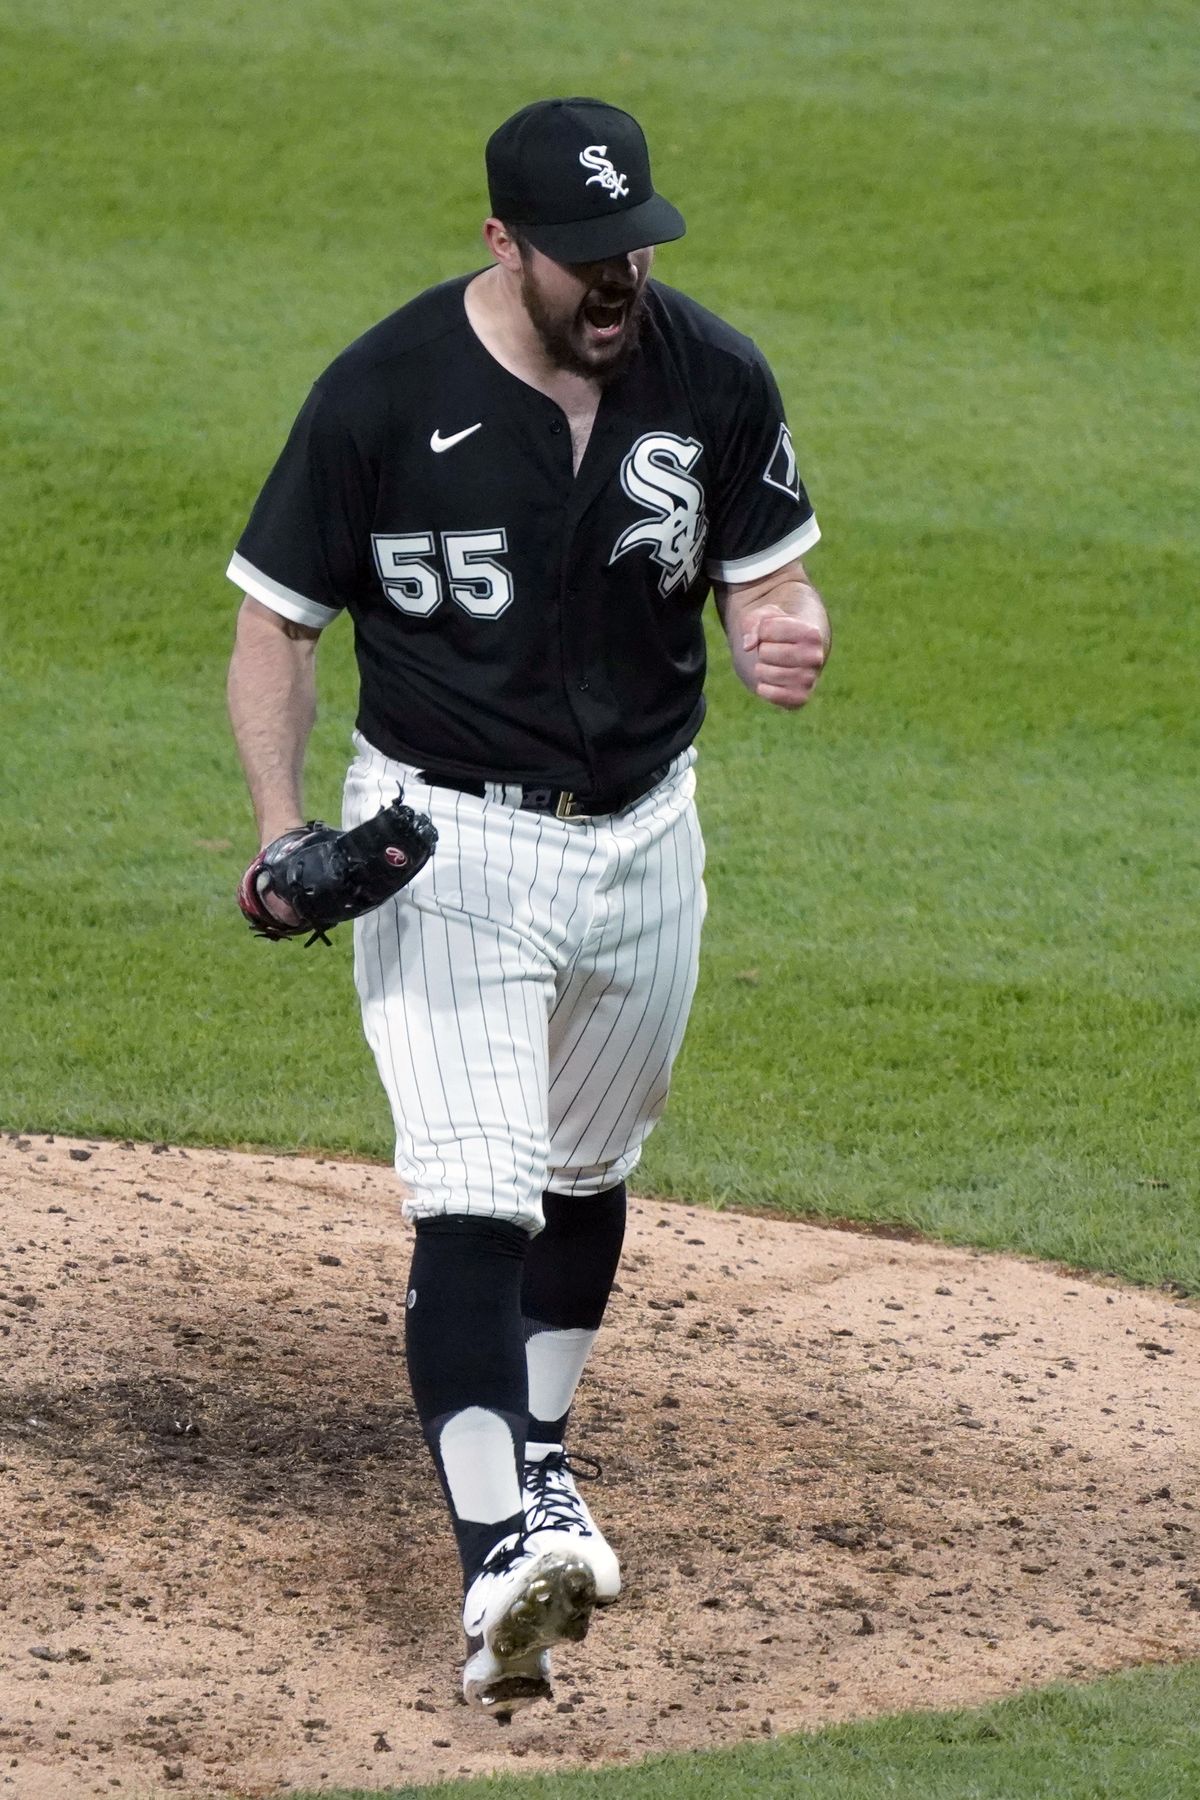 Chicago White Sox shut out Cleveland Indians, 2-0